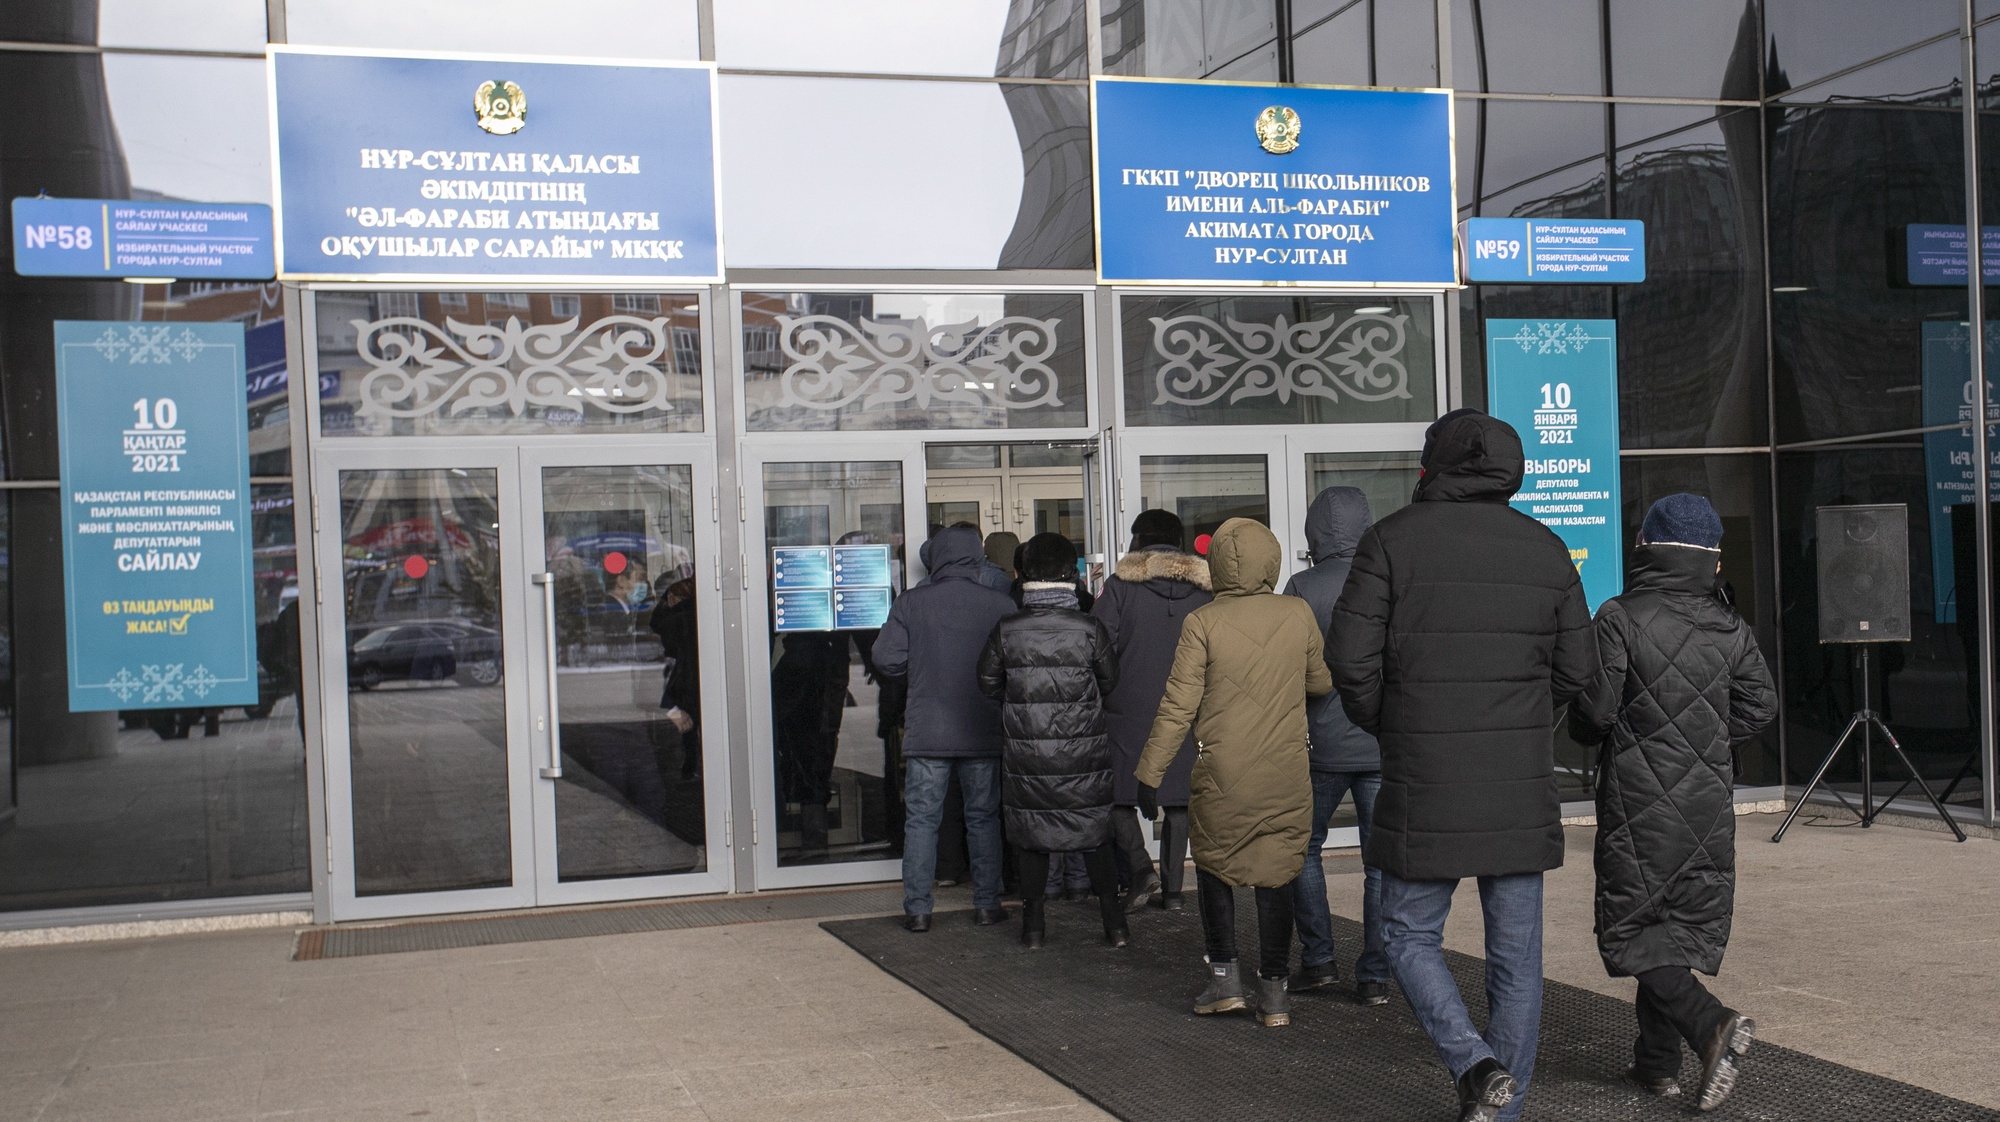 epa08929648 People line up outside a polling station during Kazakhstan&#039;s legislative elections to elect the members of Majlis (lower house of the parliament) in Nur-Sultan, Kazakhstan, 10 January 2021.  EPA/RADMIR FAHRUTDINOV